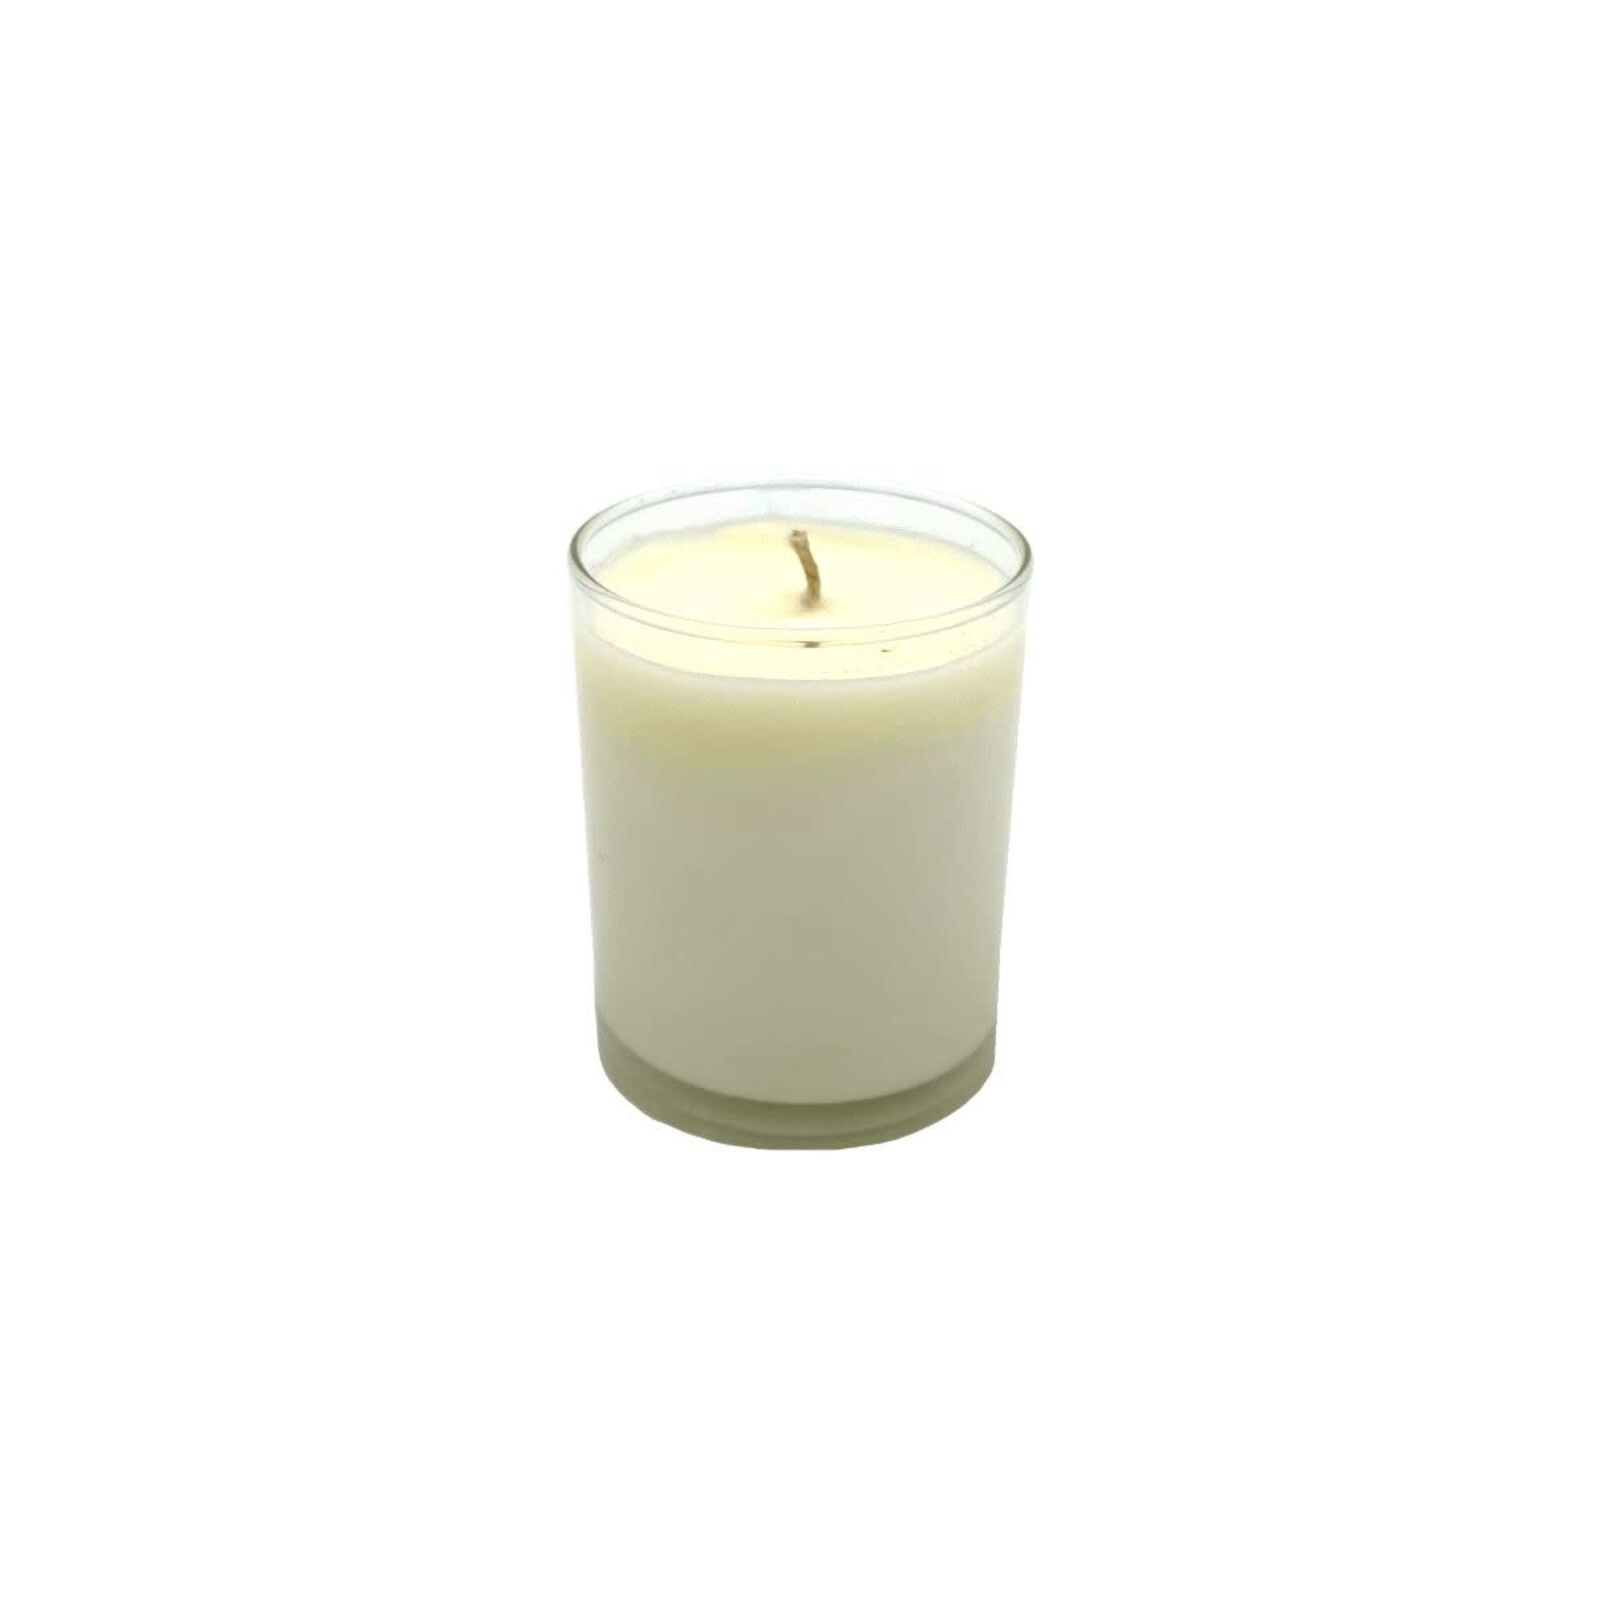 Ella B Candles Votive Soy Candle-Night at  the Opera   EB-NBS26V loading=